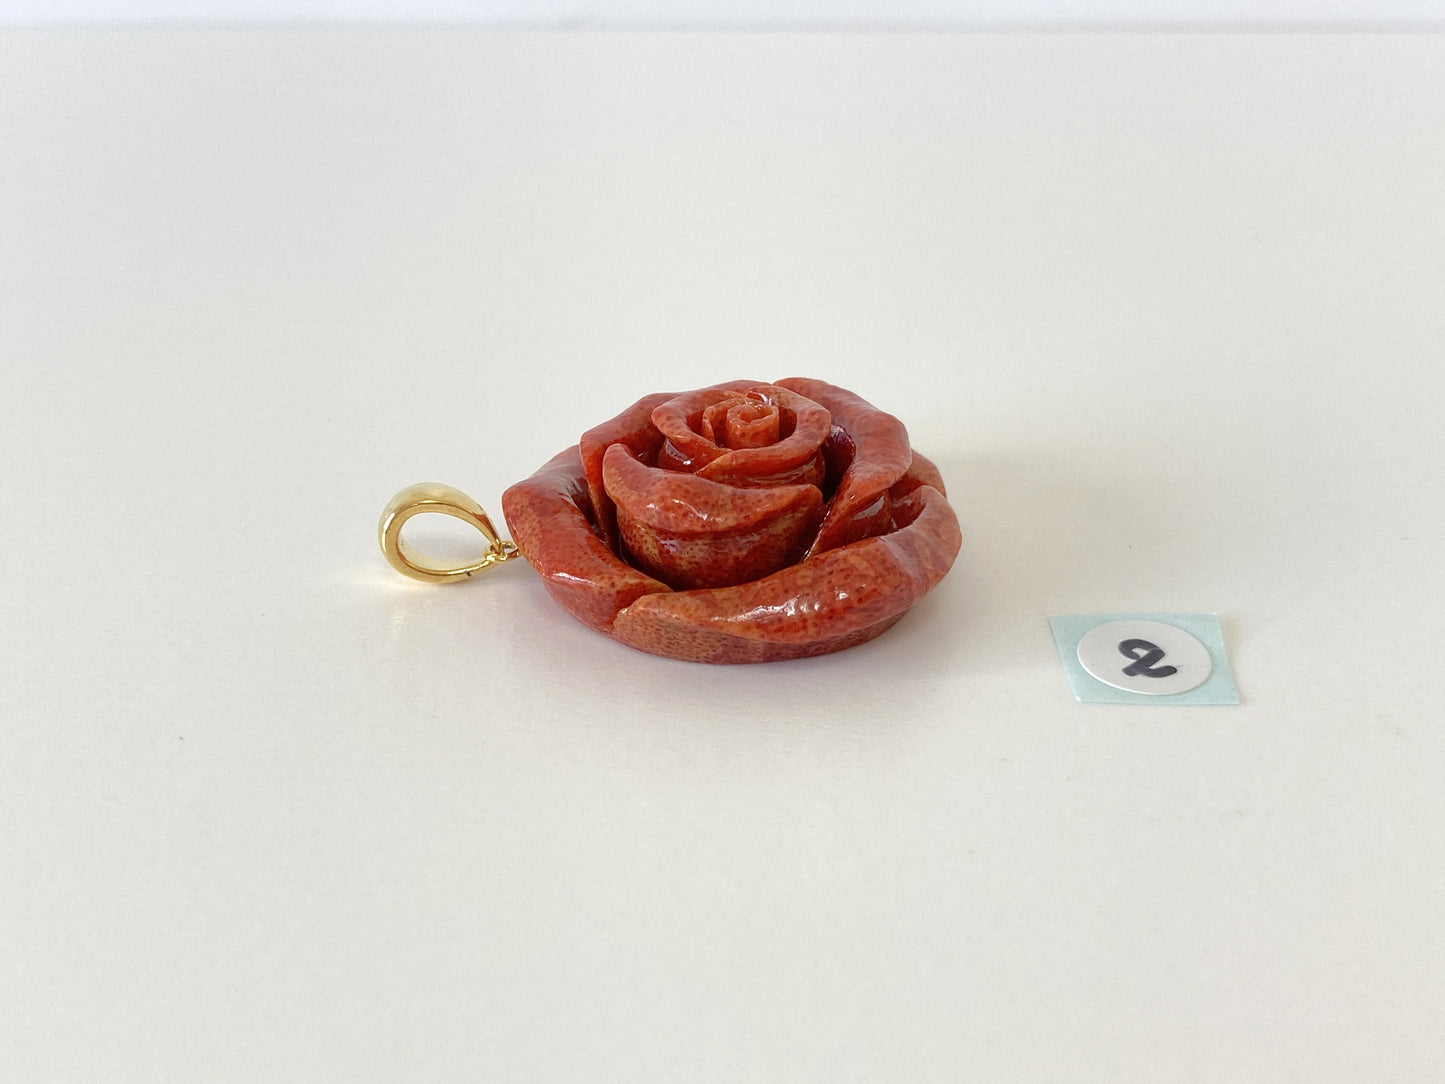 Sponge Coral Rose Pendant with Brass Bail (gold plated)/ African Coral / Diameter of 30mm / Natural Reddish-Brown Color